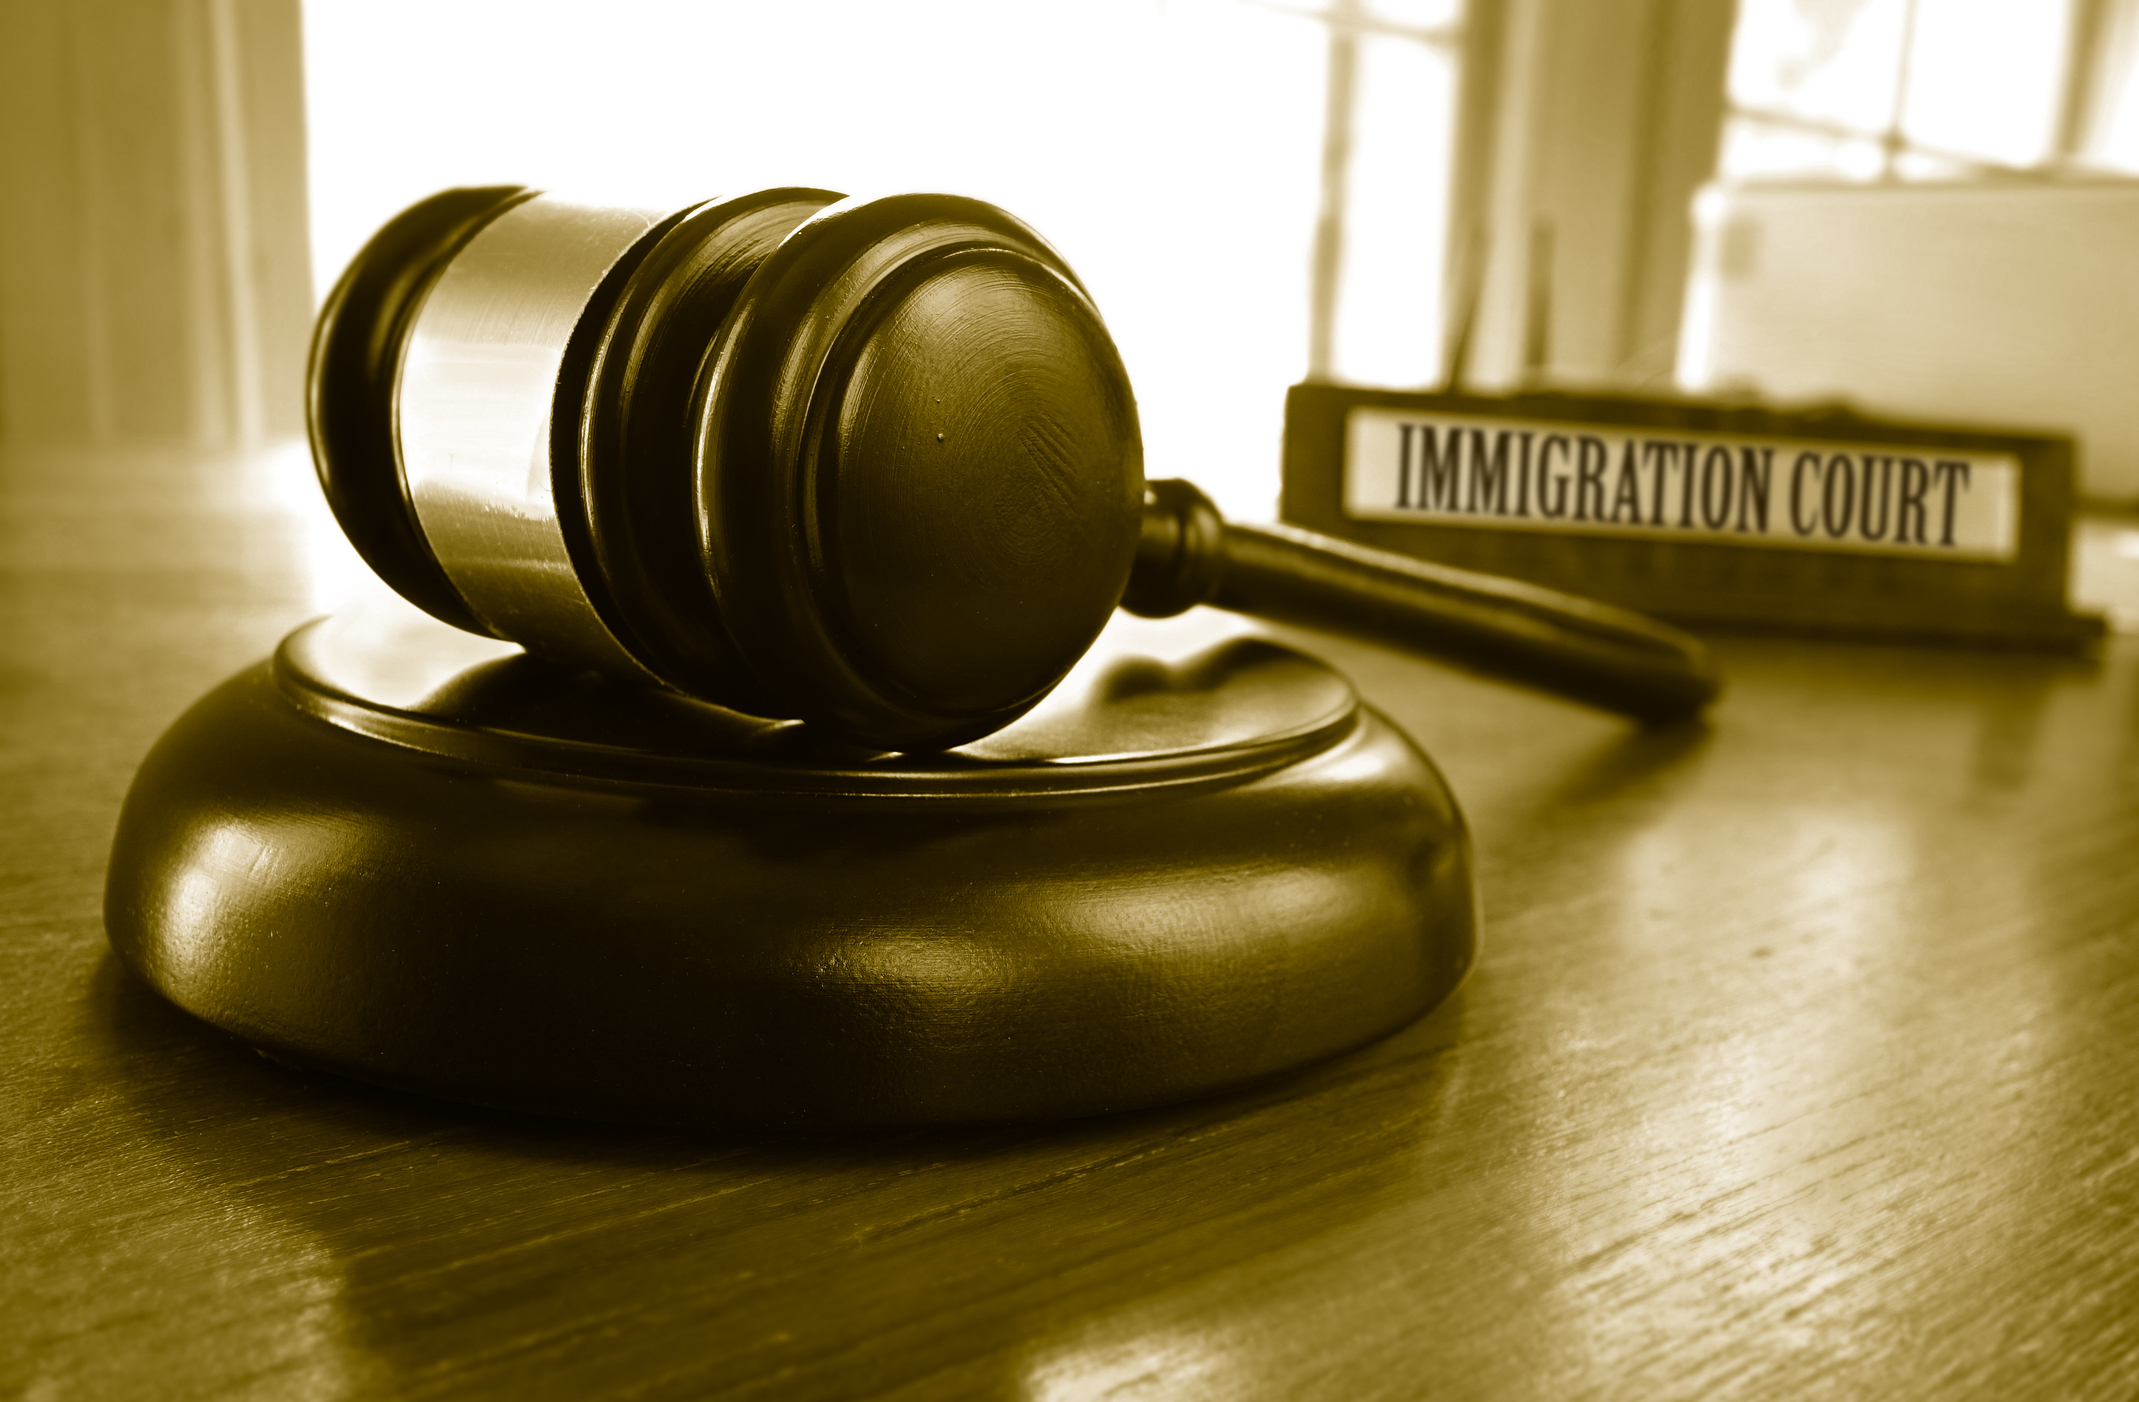 Executive Office for Immigration Review Update: Motion to Reconsider Denied